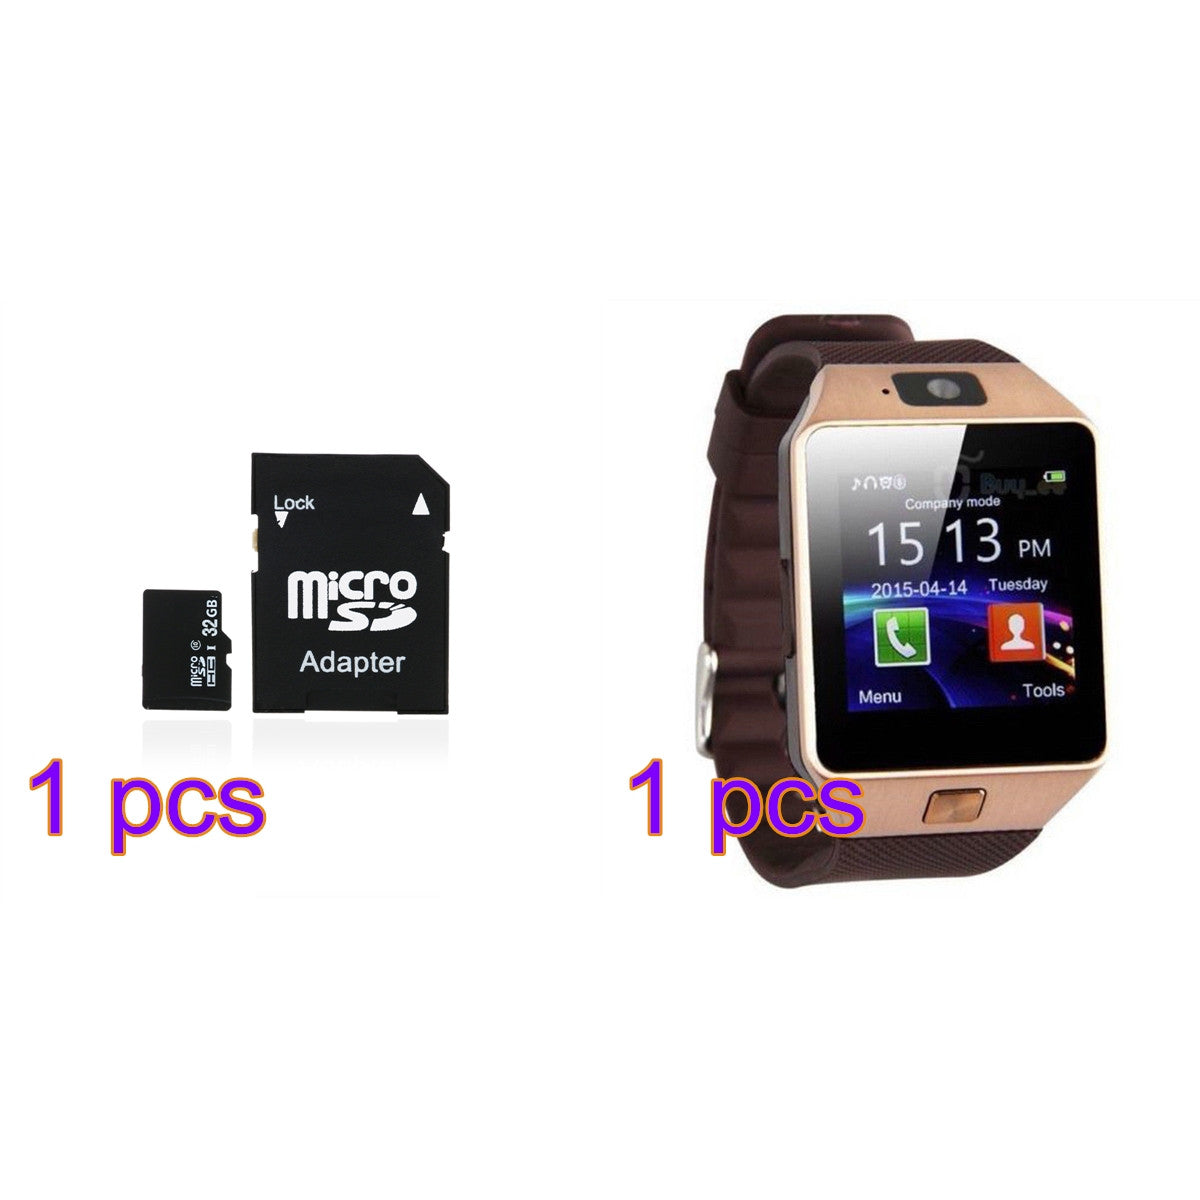 Bluetooth Smart Watch DZ09 Smartwatch GSM SIM Card With Camera for Android IOS Phones